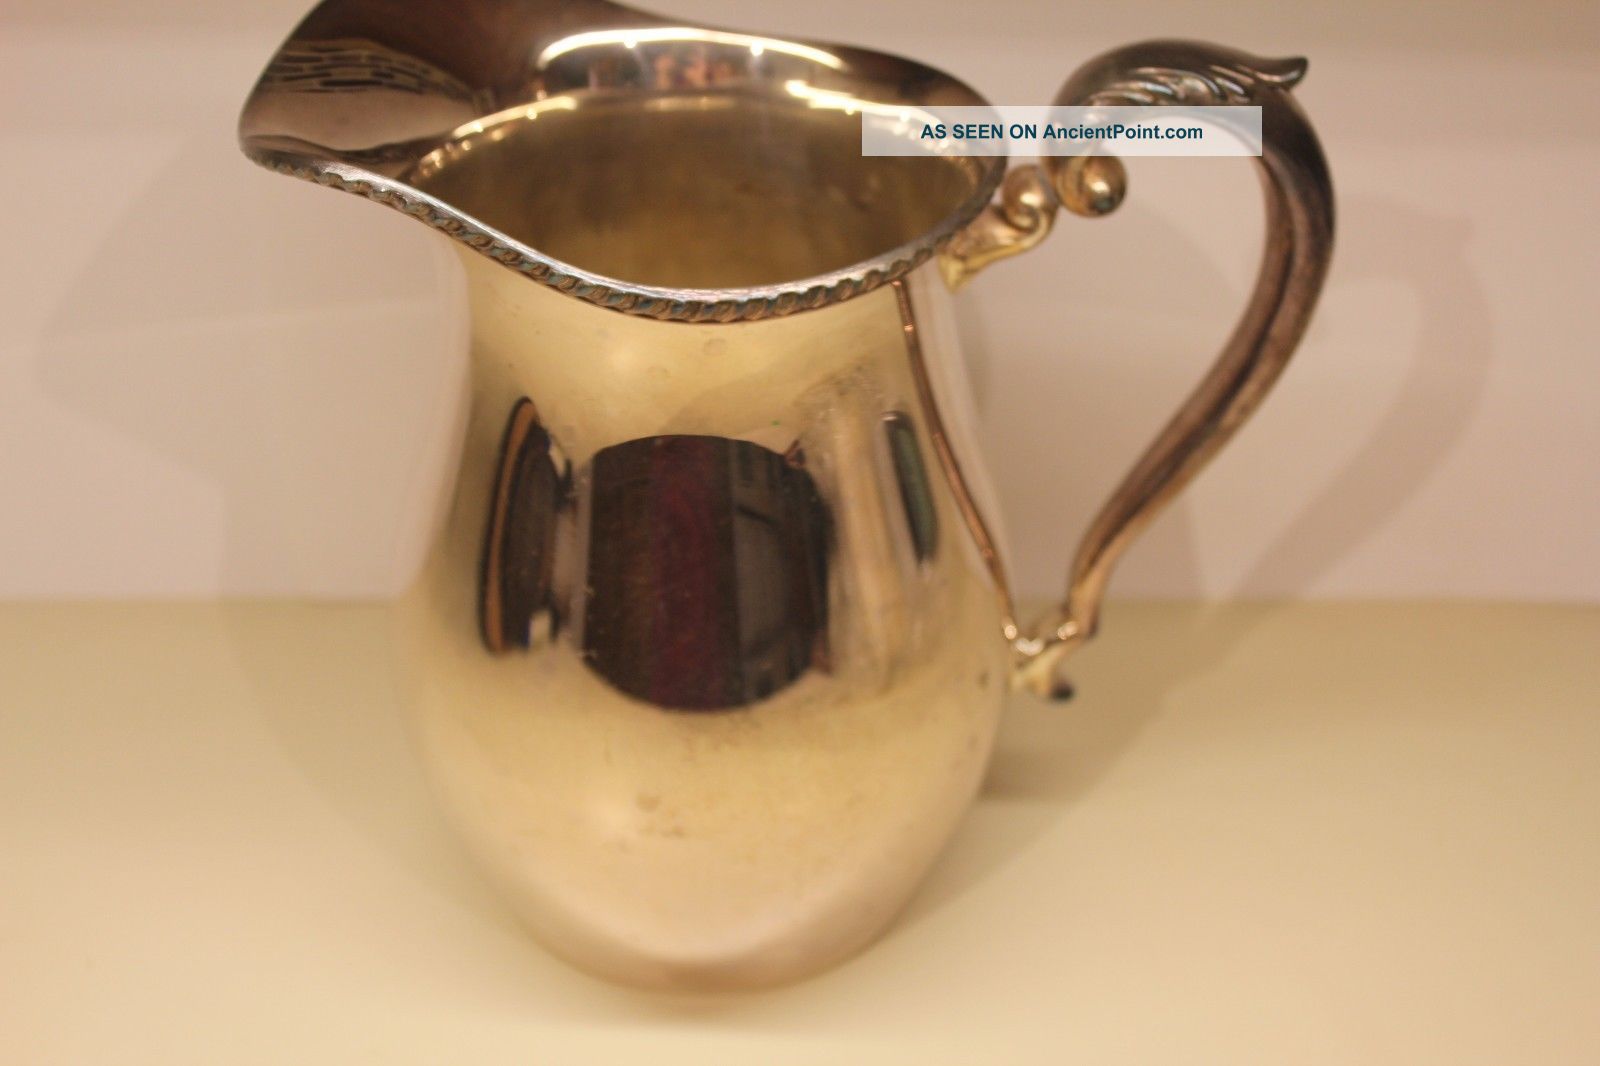 Vintage Crescent Restruant Waiter Water Pitcher Silver Plated Hallmarked Pitchers & Jugs photo